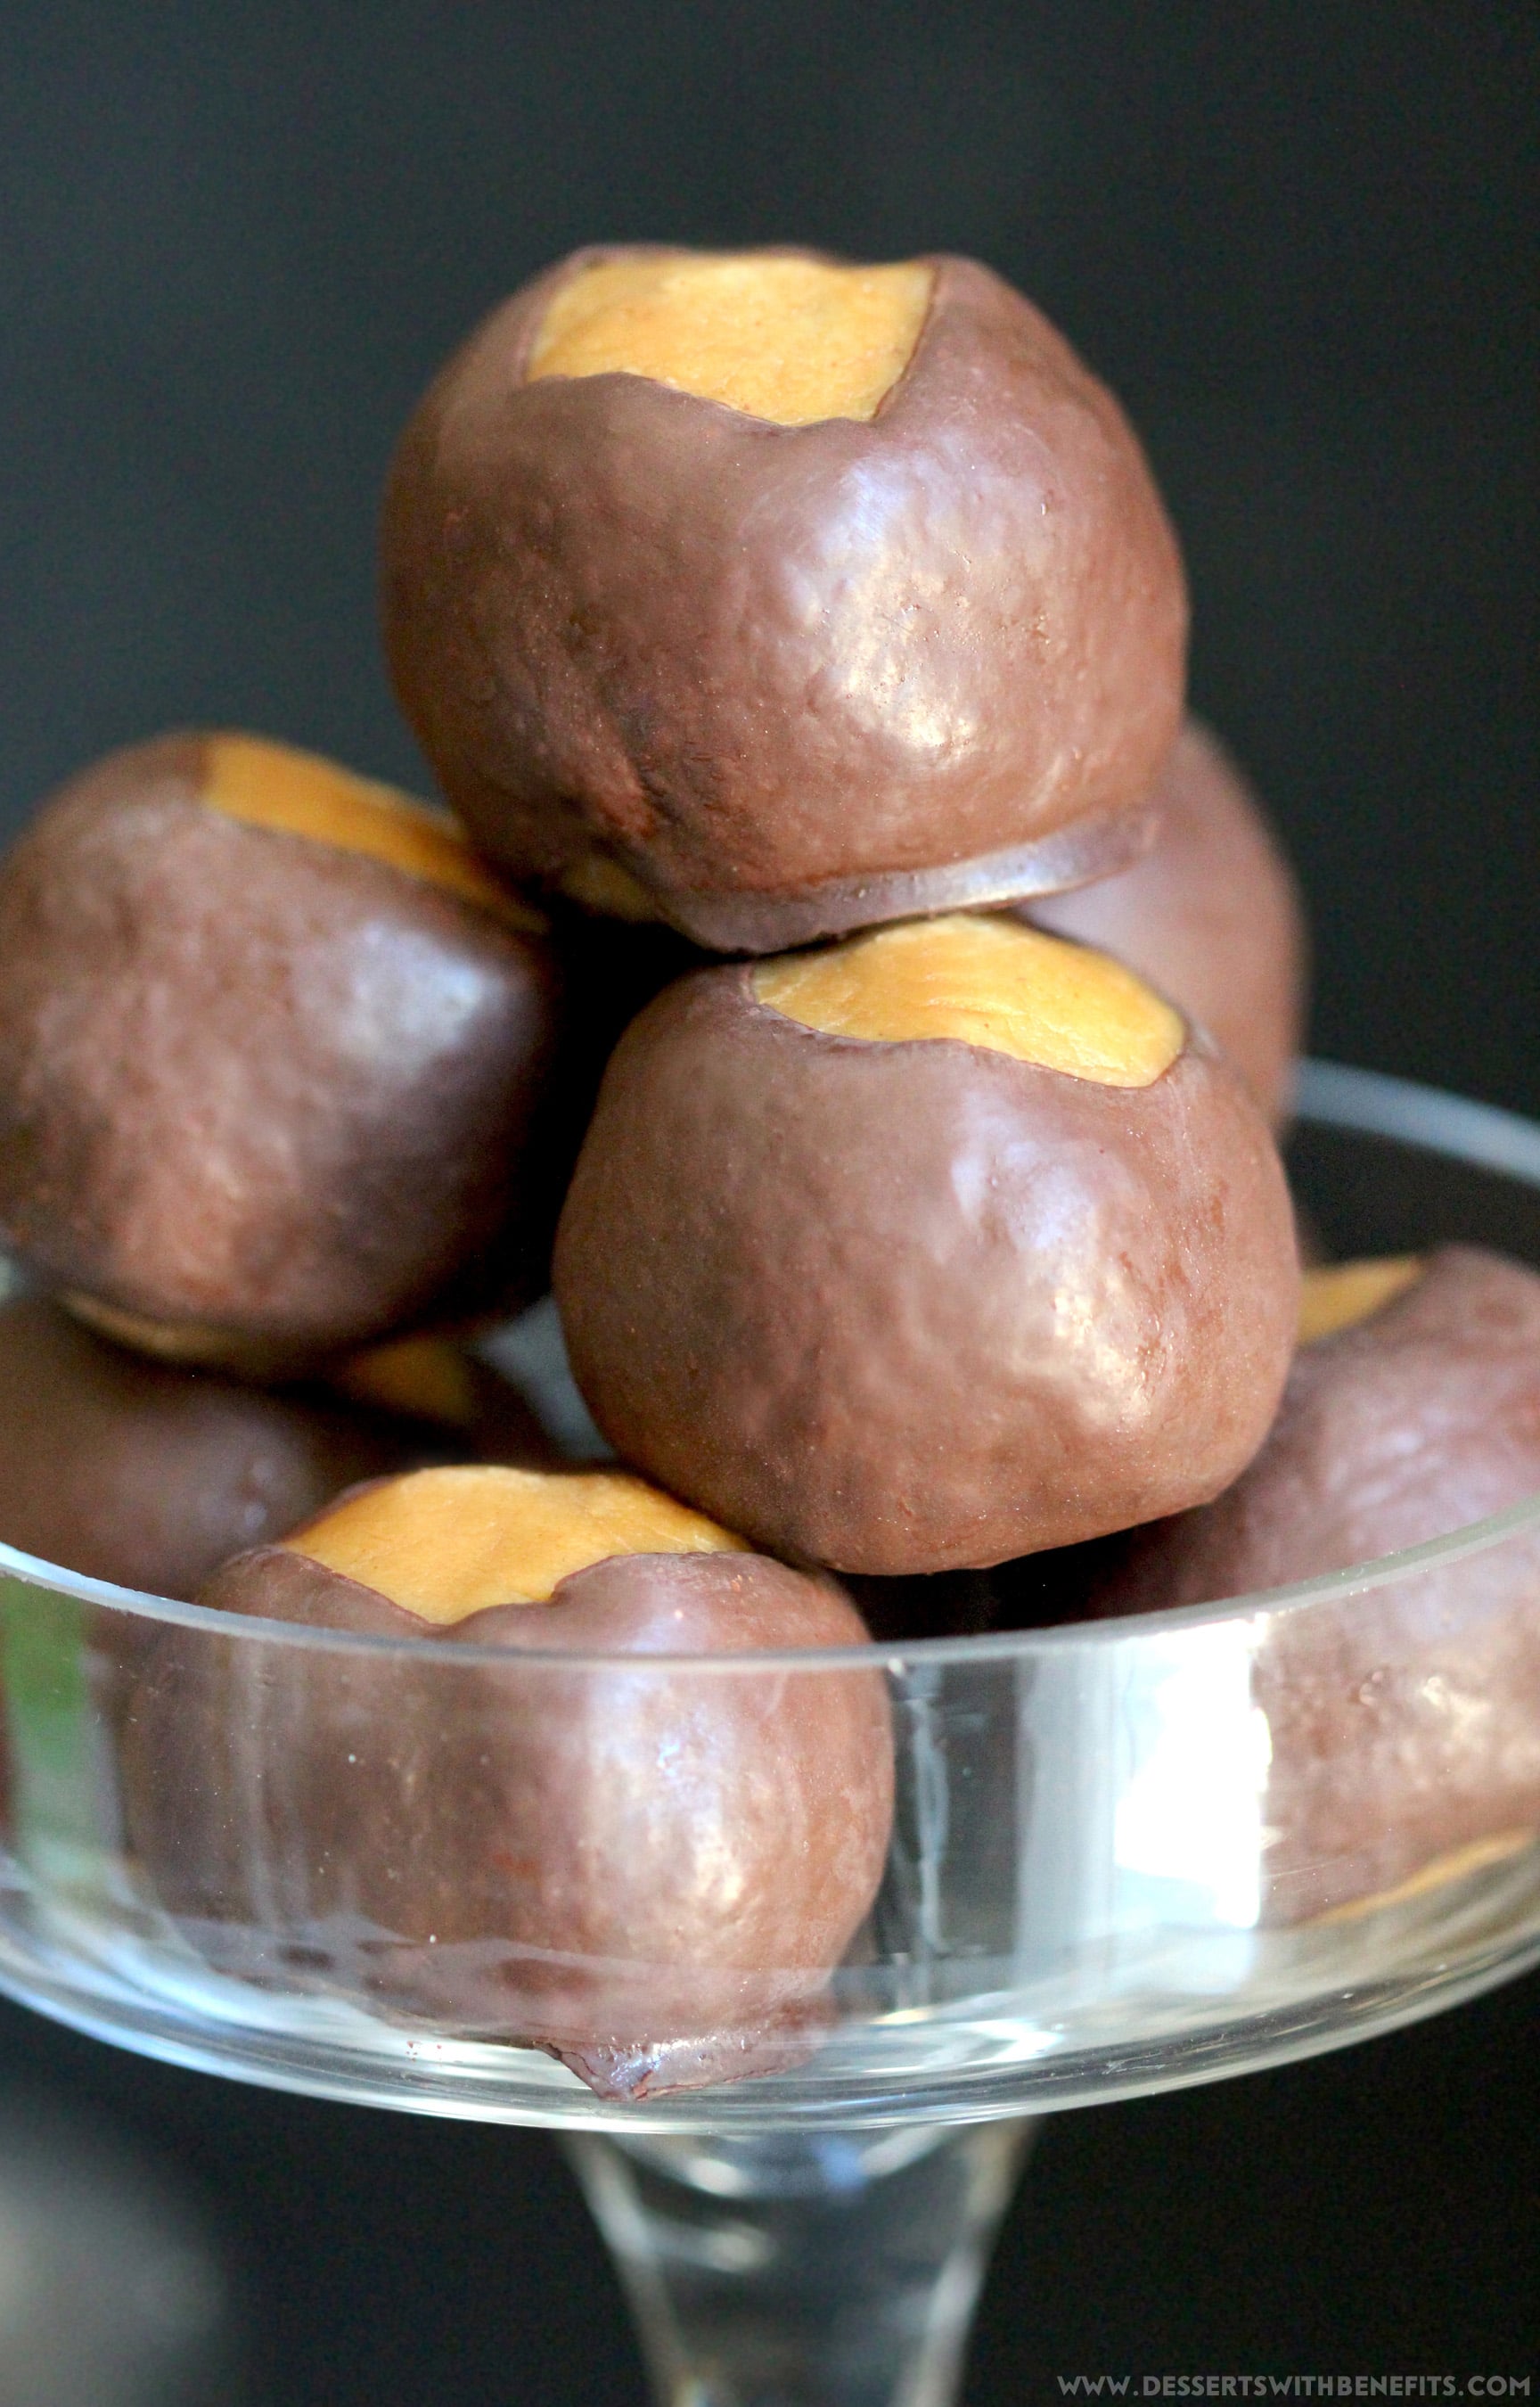 These Healthy Buckeye Balls are sweet and fudgy, peanut buttery orbs of magic surrounded by a layer of rich and decadent dark chocolate. It’s hard to believe they’re refined sugar free, low carb, high protein, and gluten free! Healthy Dessert Recipes at Desserts with Benefits